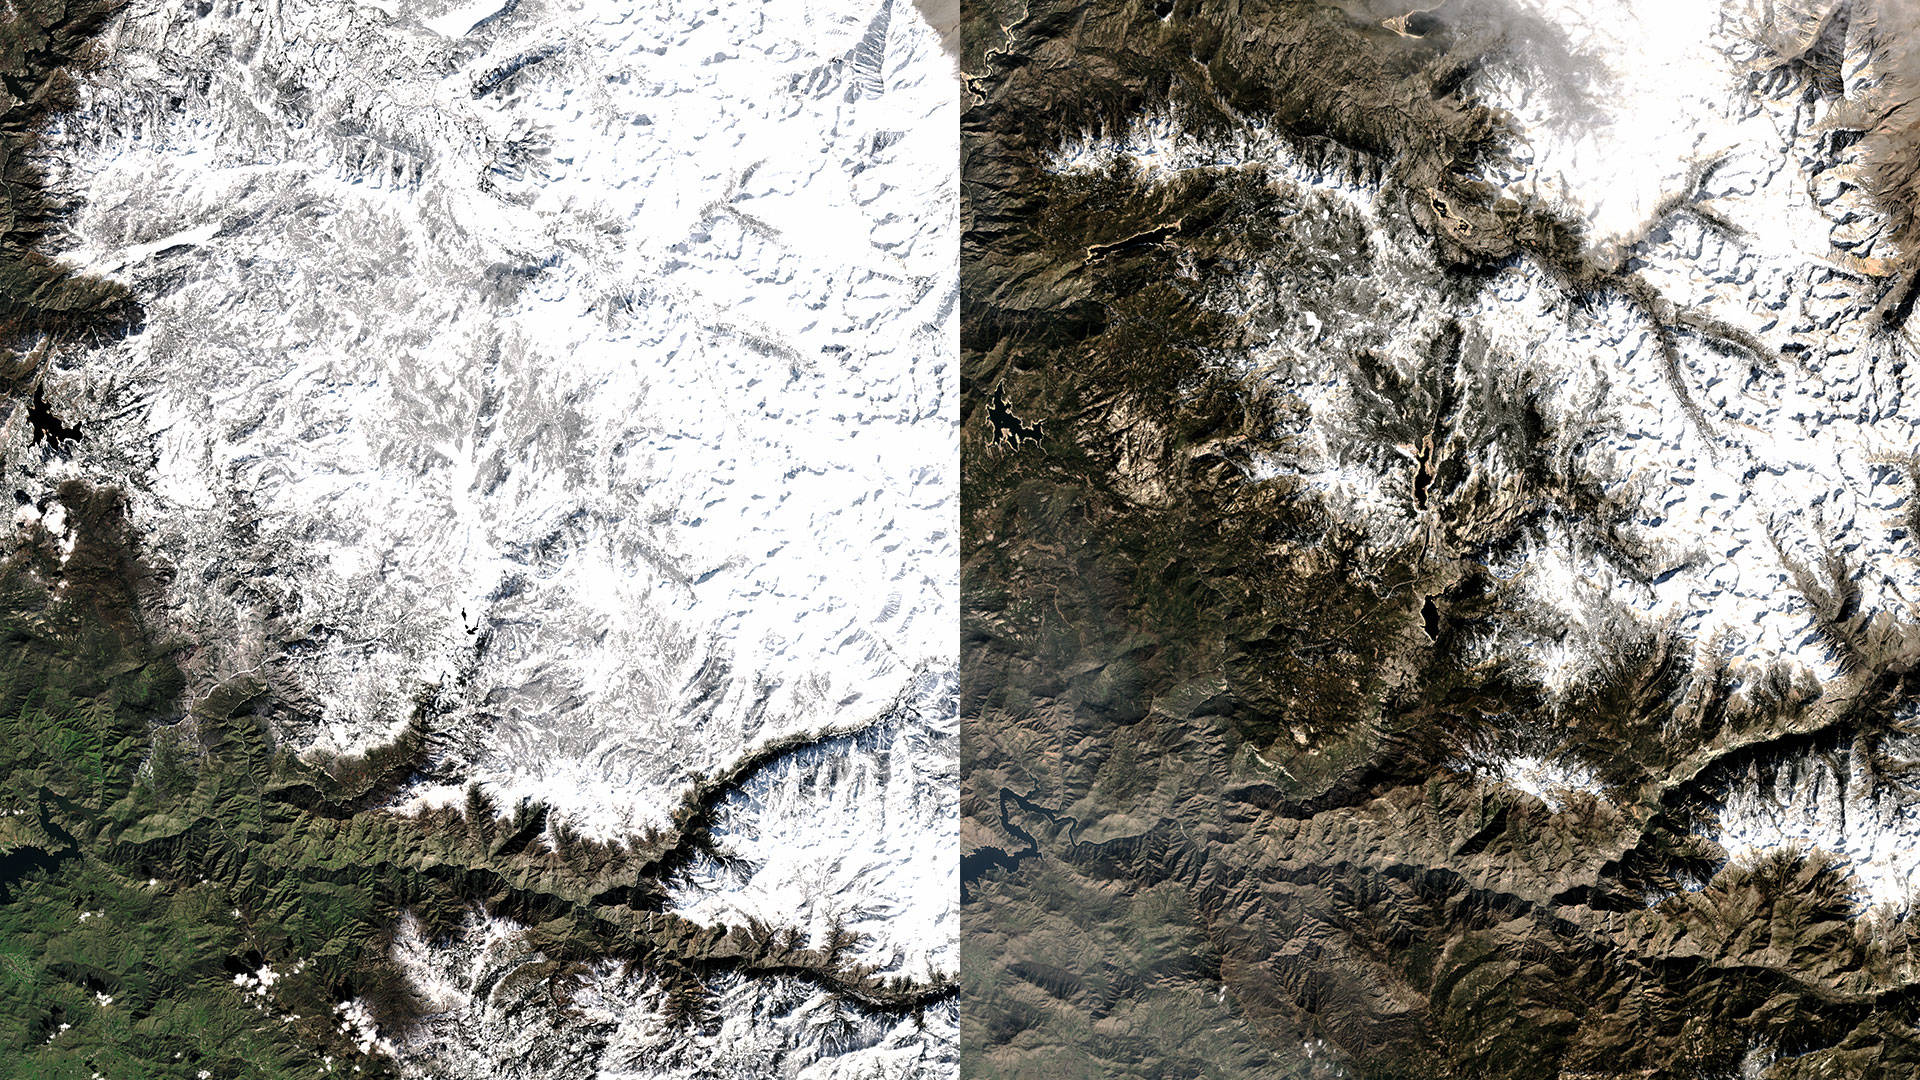 A satellite view of Mono Hot Springs February 12, 2017 (left) and February 11, 2018 (right).  Teodros Hailye/Image by Planet Labs